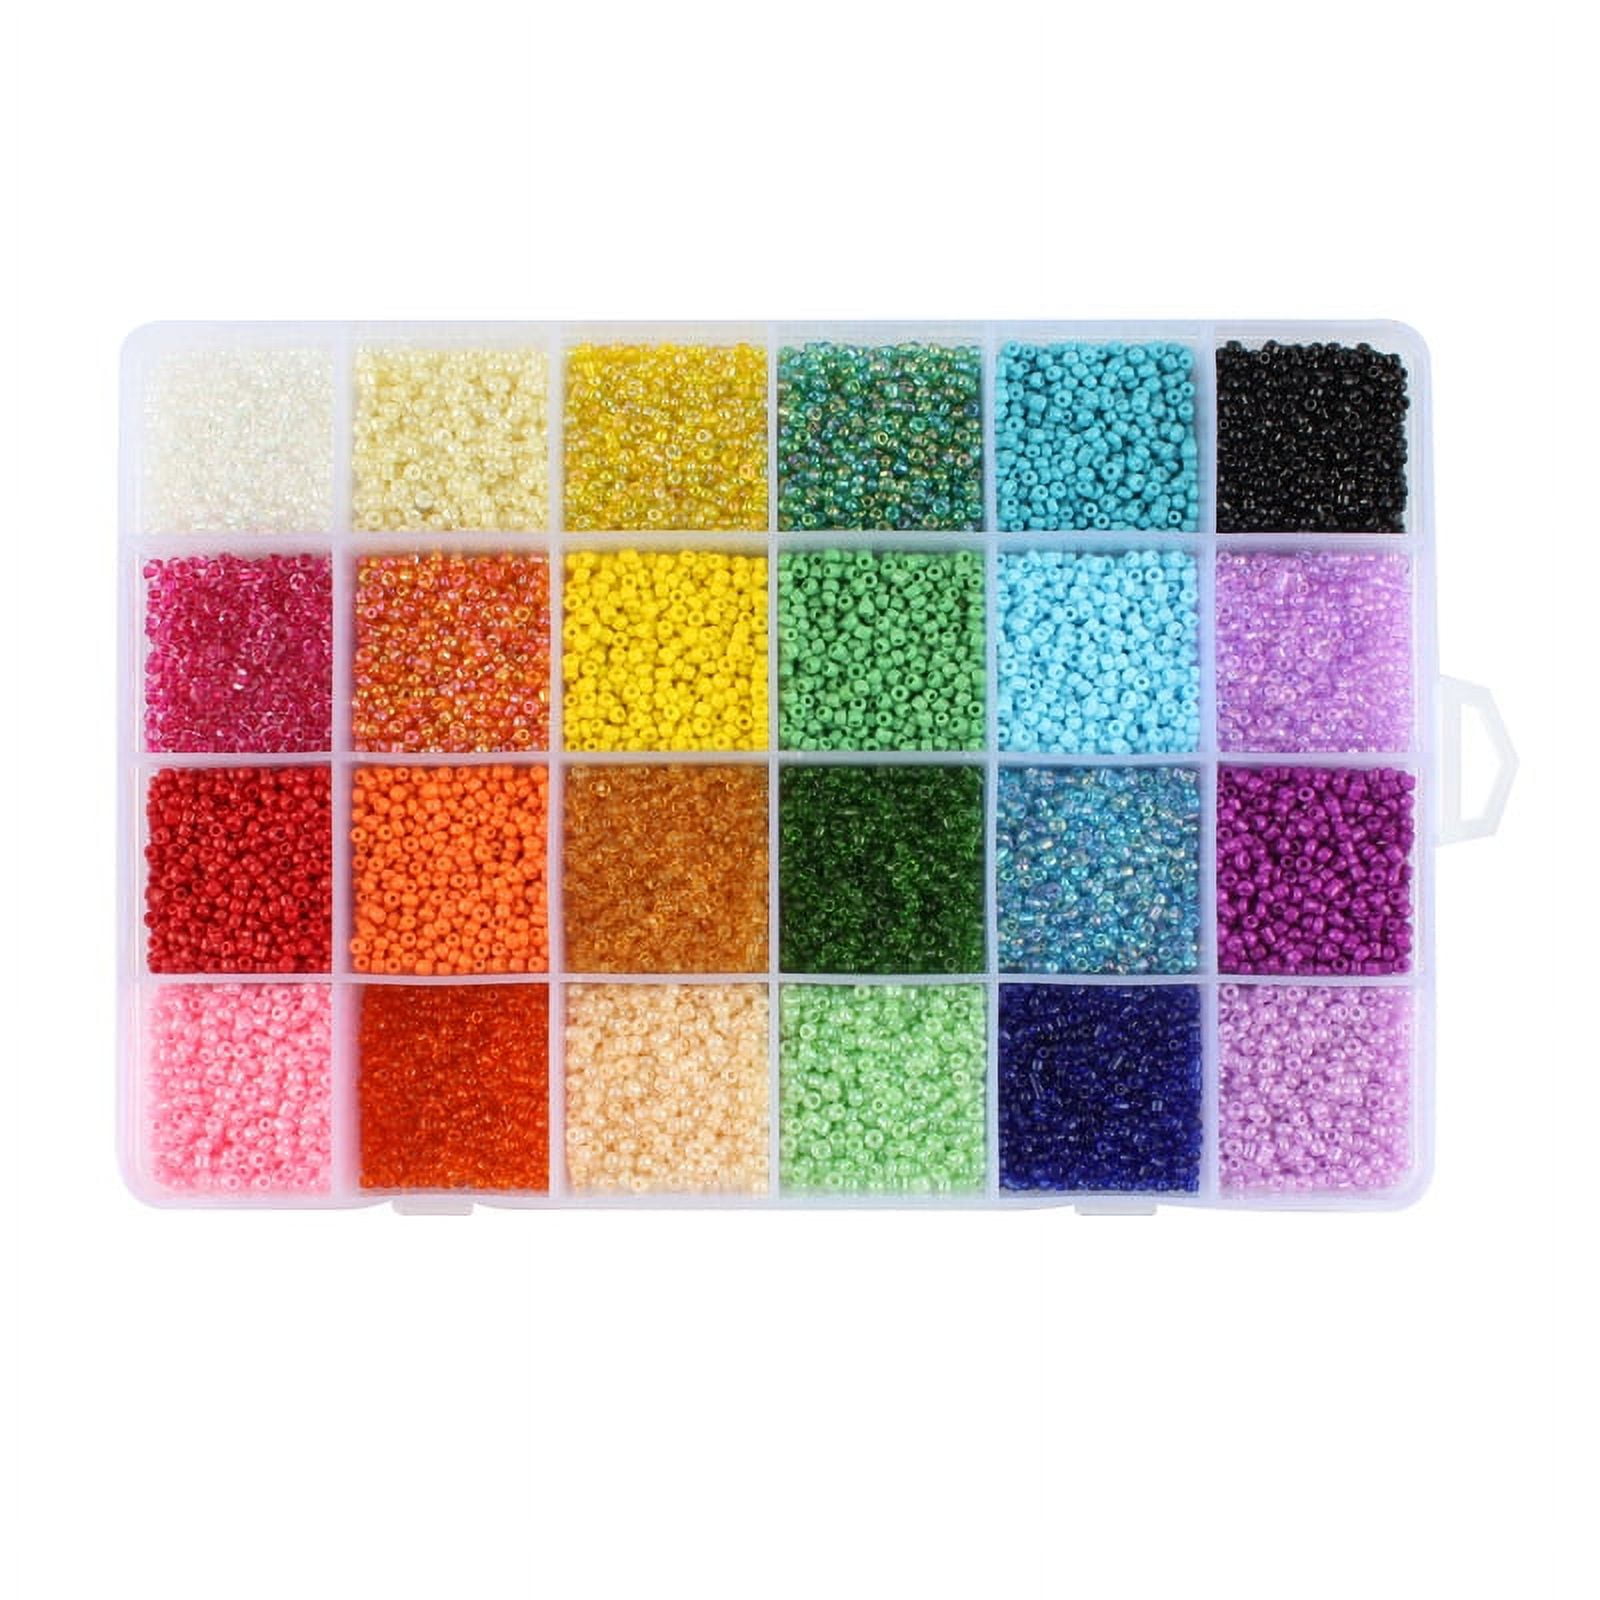 60693 Pieces Beads for Bracelets, 120 Colours Beads Set Jewellery 2 mm  Beads for Threading, Seed Beads Bracelets Make Your Own Set with 300 Pieces